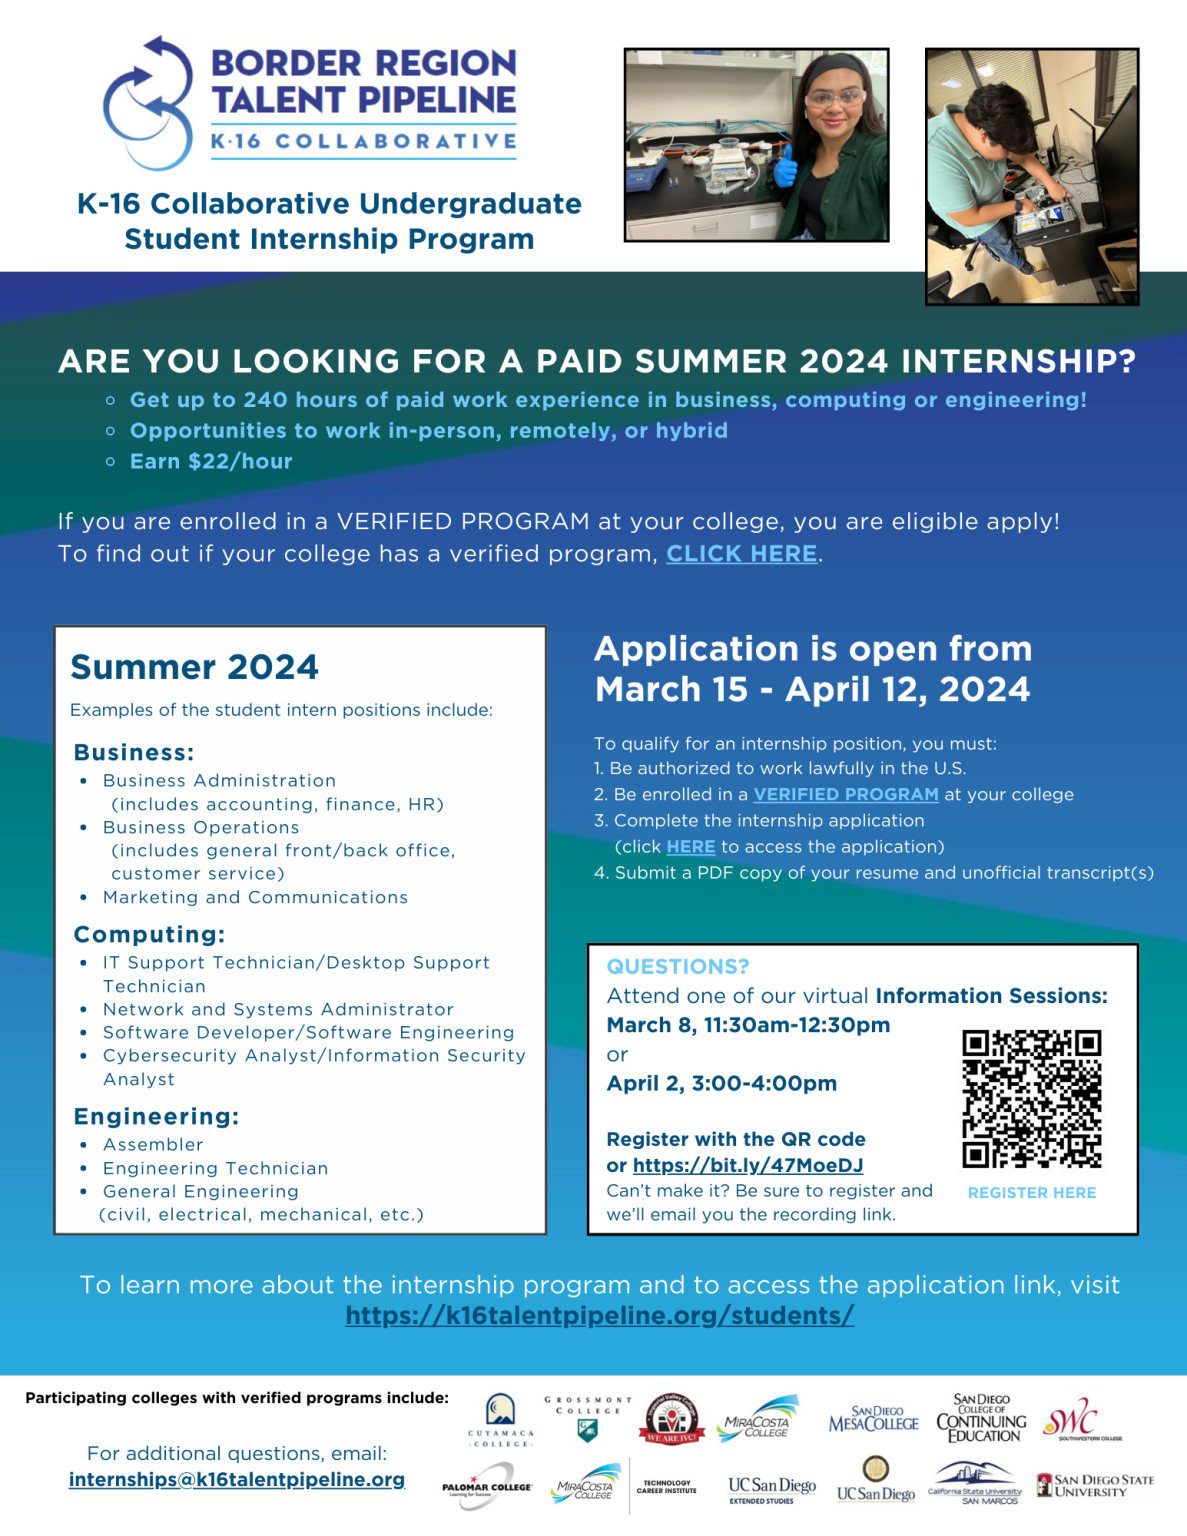 Internships in Business,Computing and Engineering for Summer 2024!